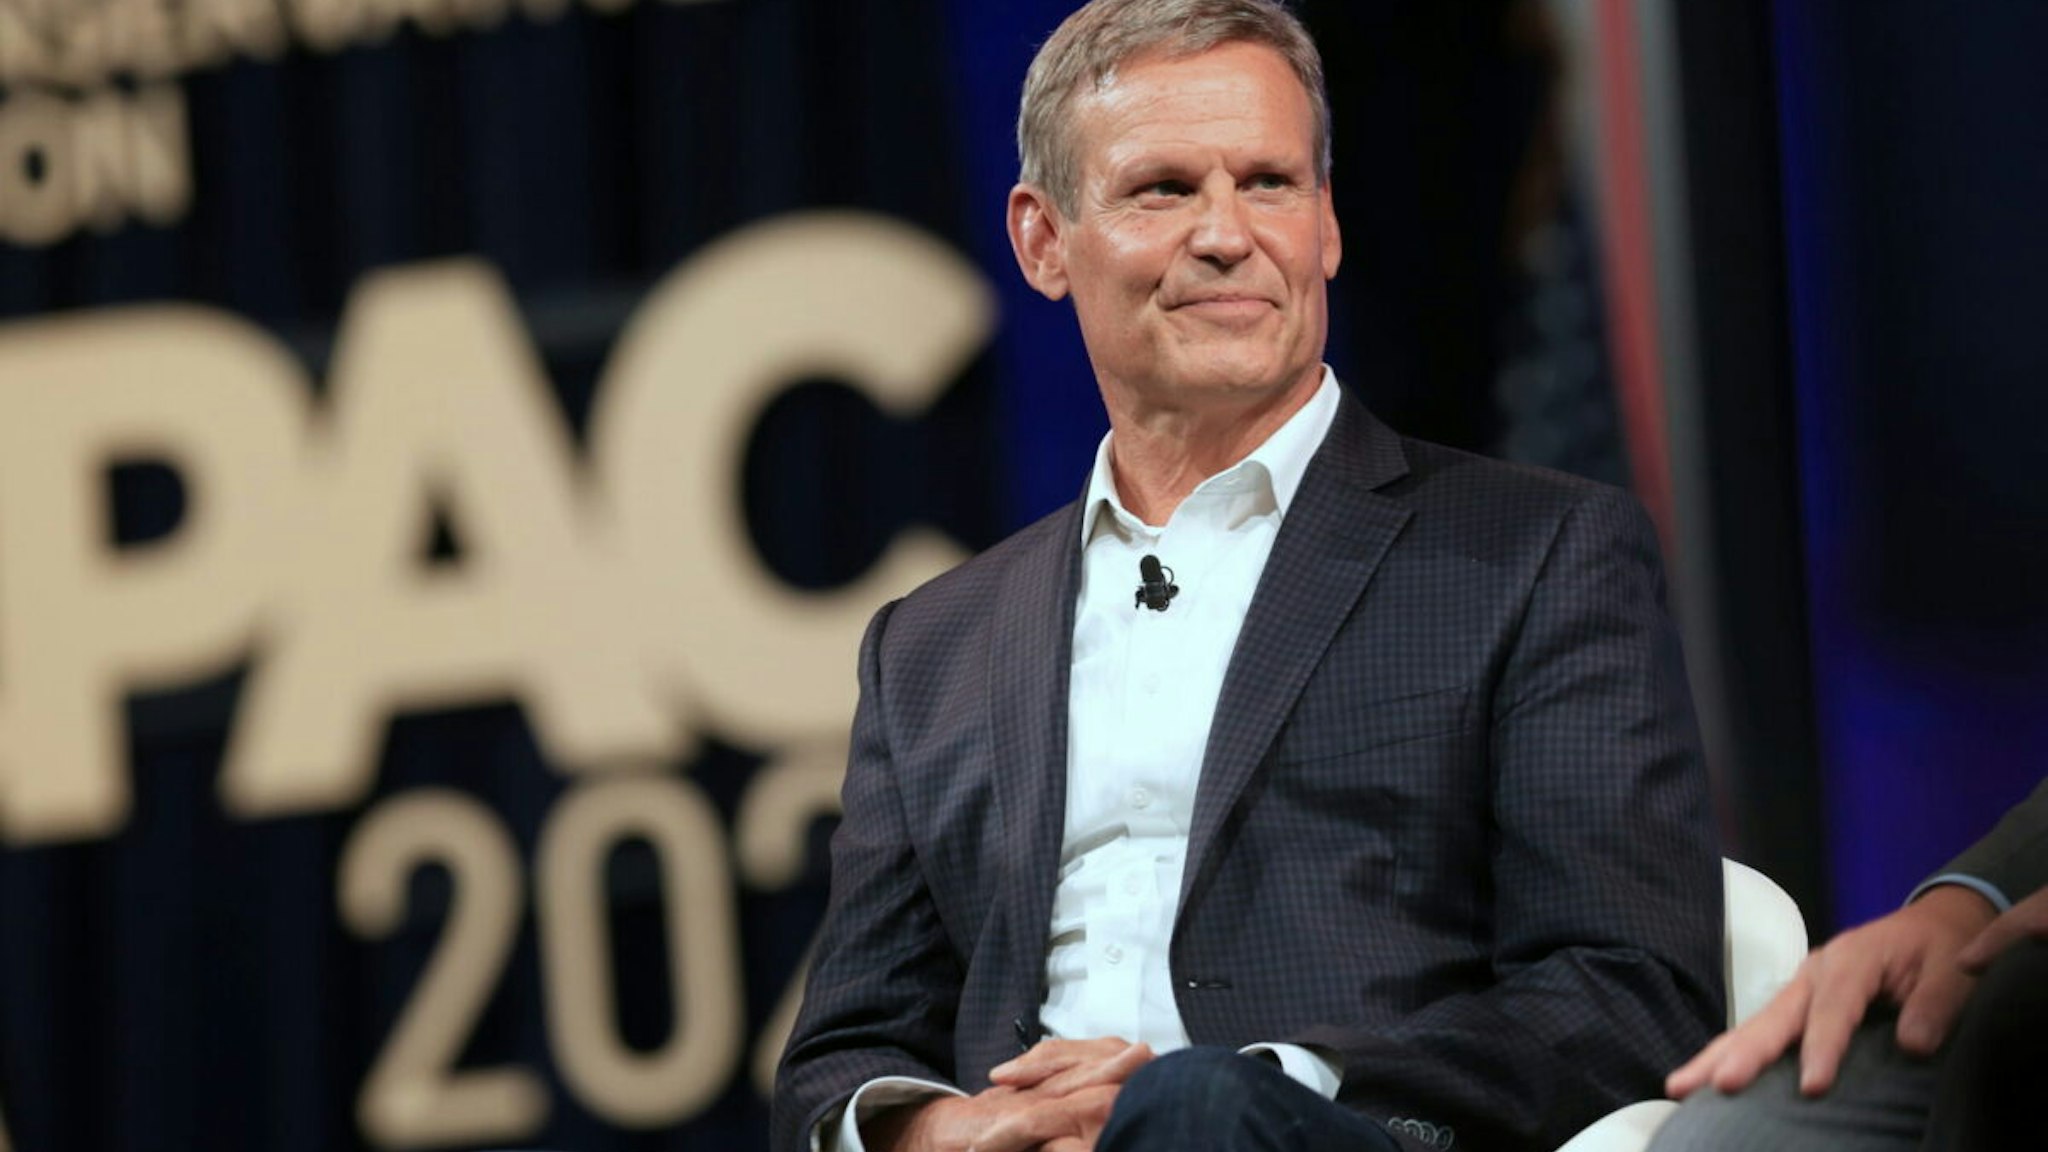 Bill Lee, governor of Tennessee, smiles during the Conservative Political Action Conference (CPAC) in Dallas, Texas, U.S., on Saturday, July 10, 2021